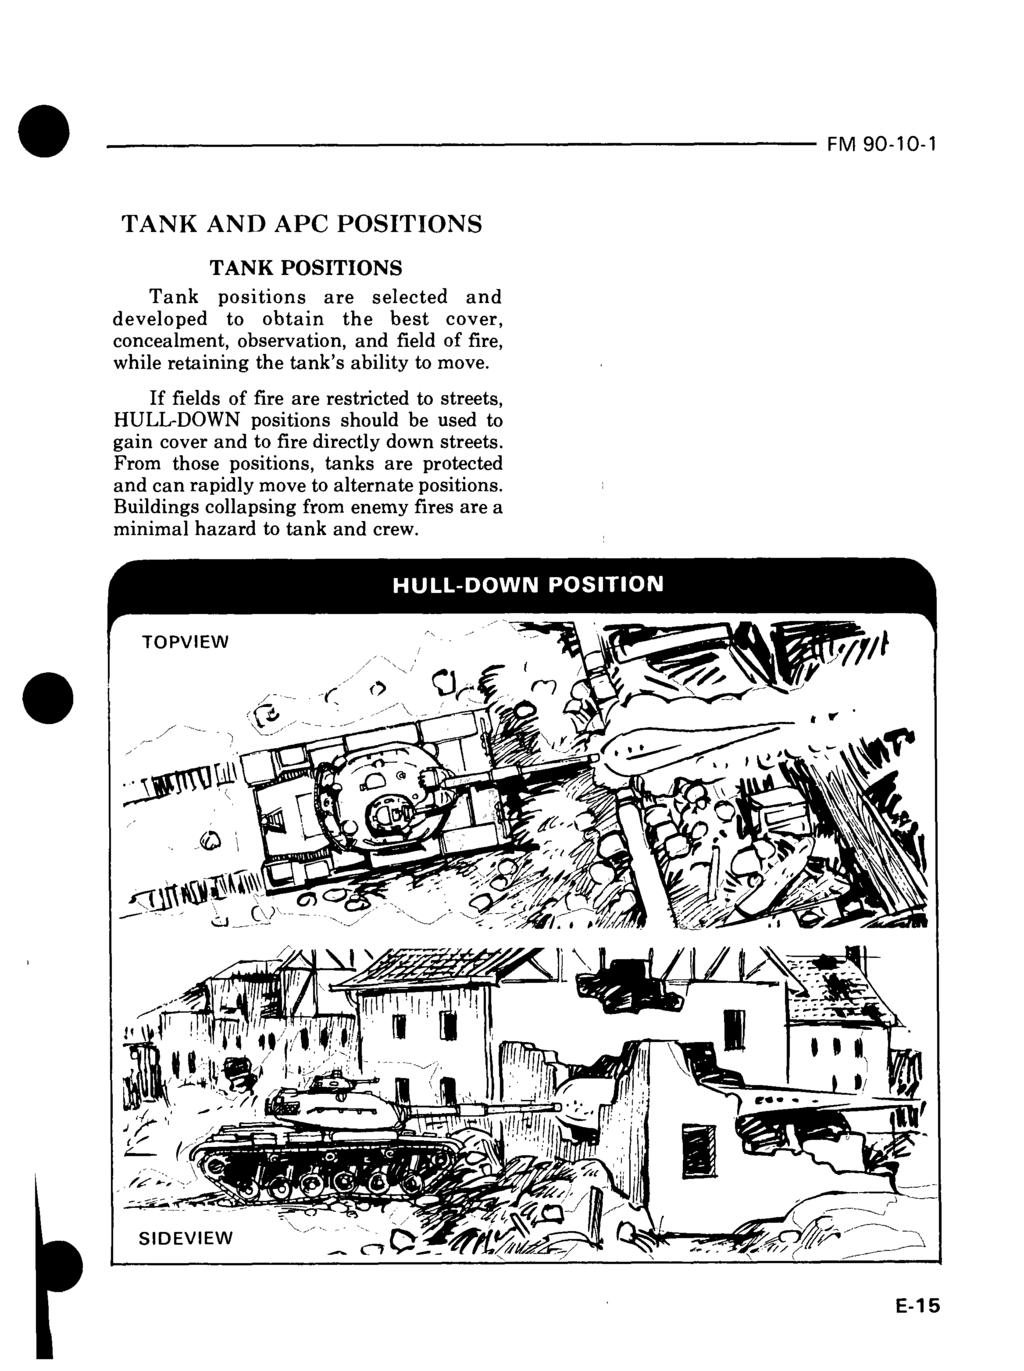 TANK AND APC POSITIONS TANK POSITIONS Tank positions are selected and developed to obtain the best cover, concealment, observation, and field of fire, while retaining the tank s ability to move.